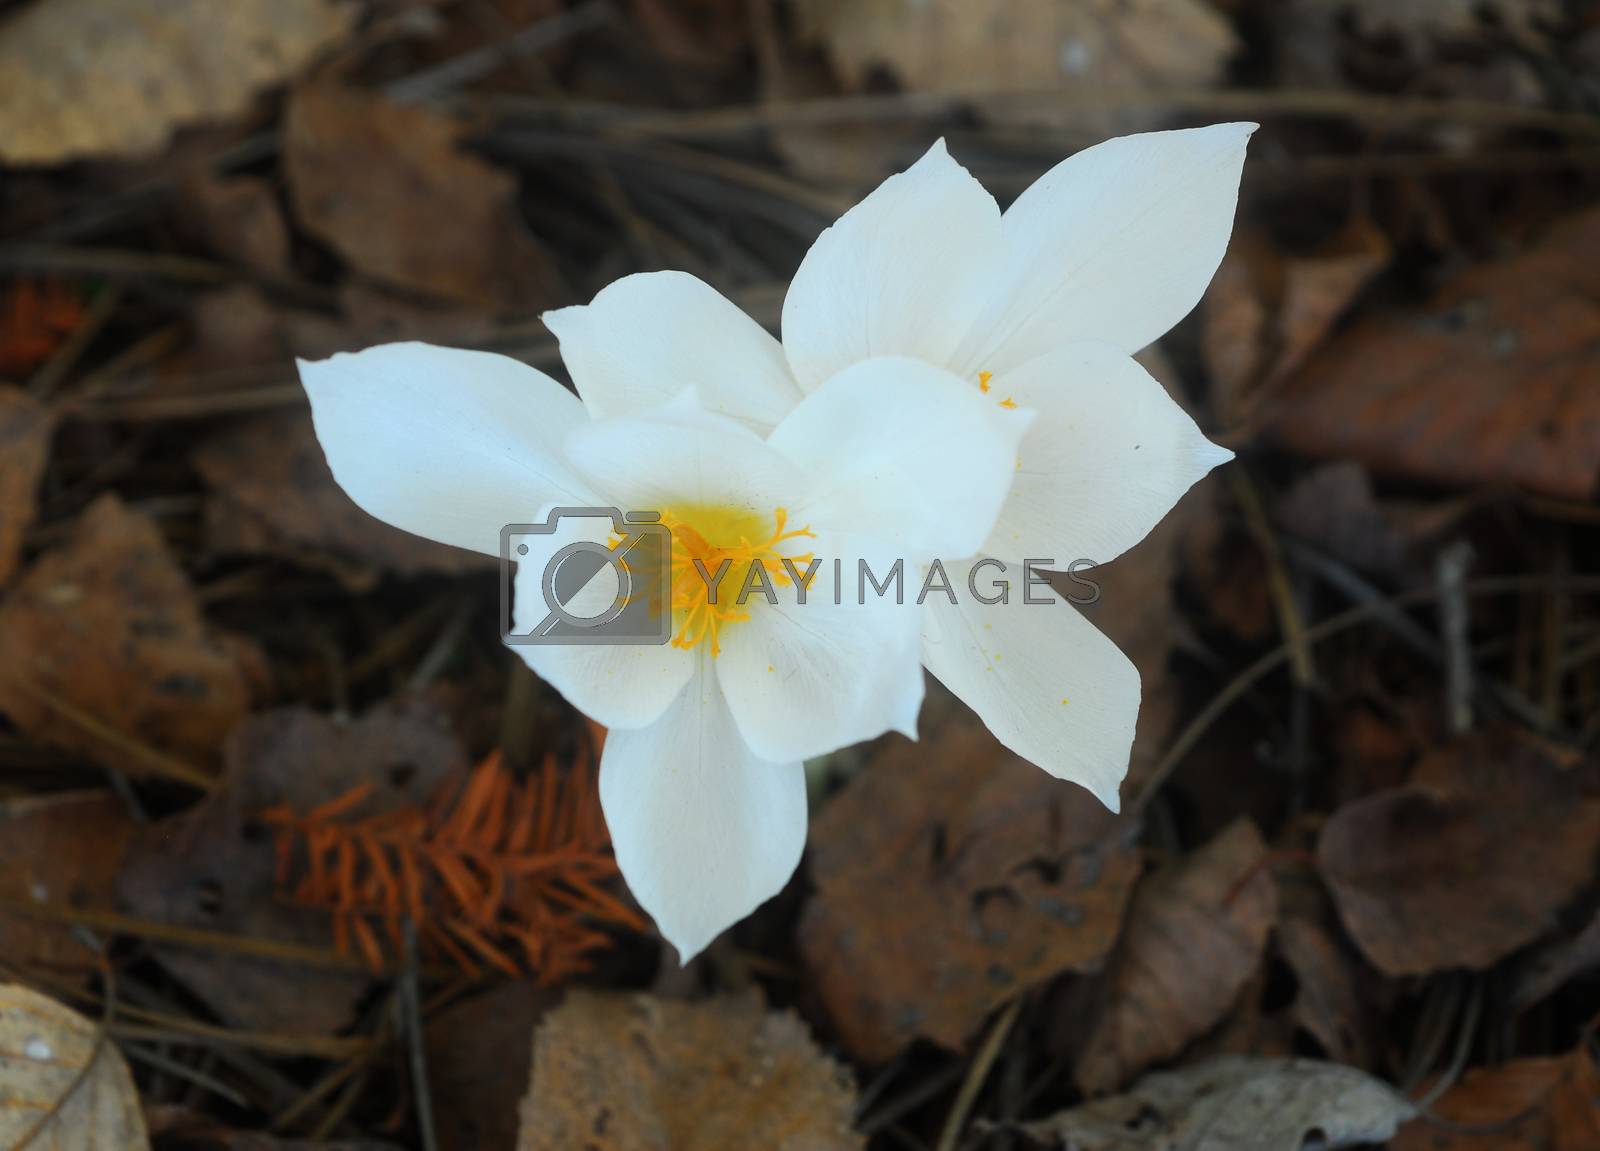 Royalty free image of white yellow Flower by nikonite